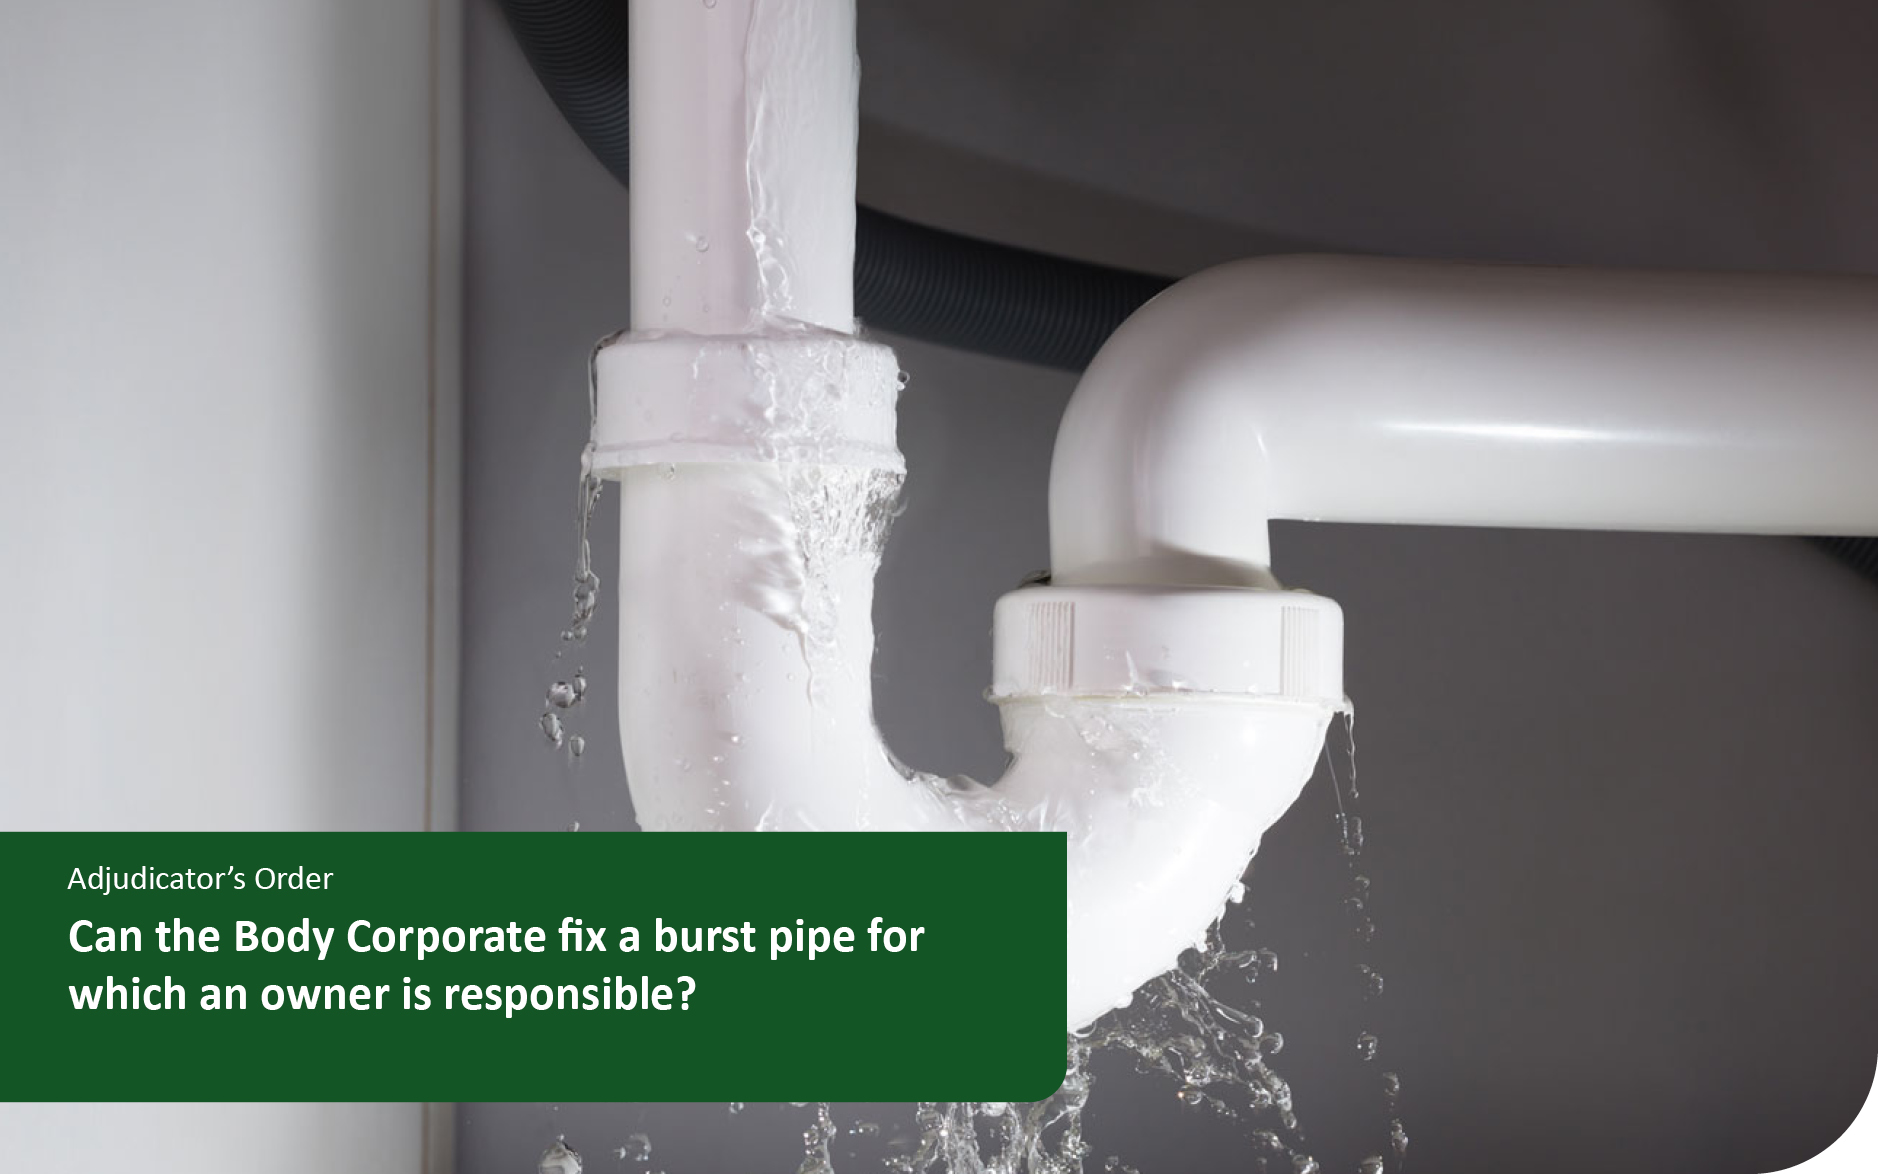 Can the Body Corporate fix a burst pipe for which an owner is responsible?